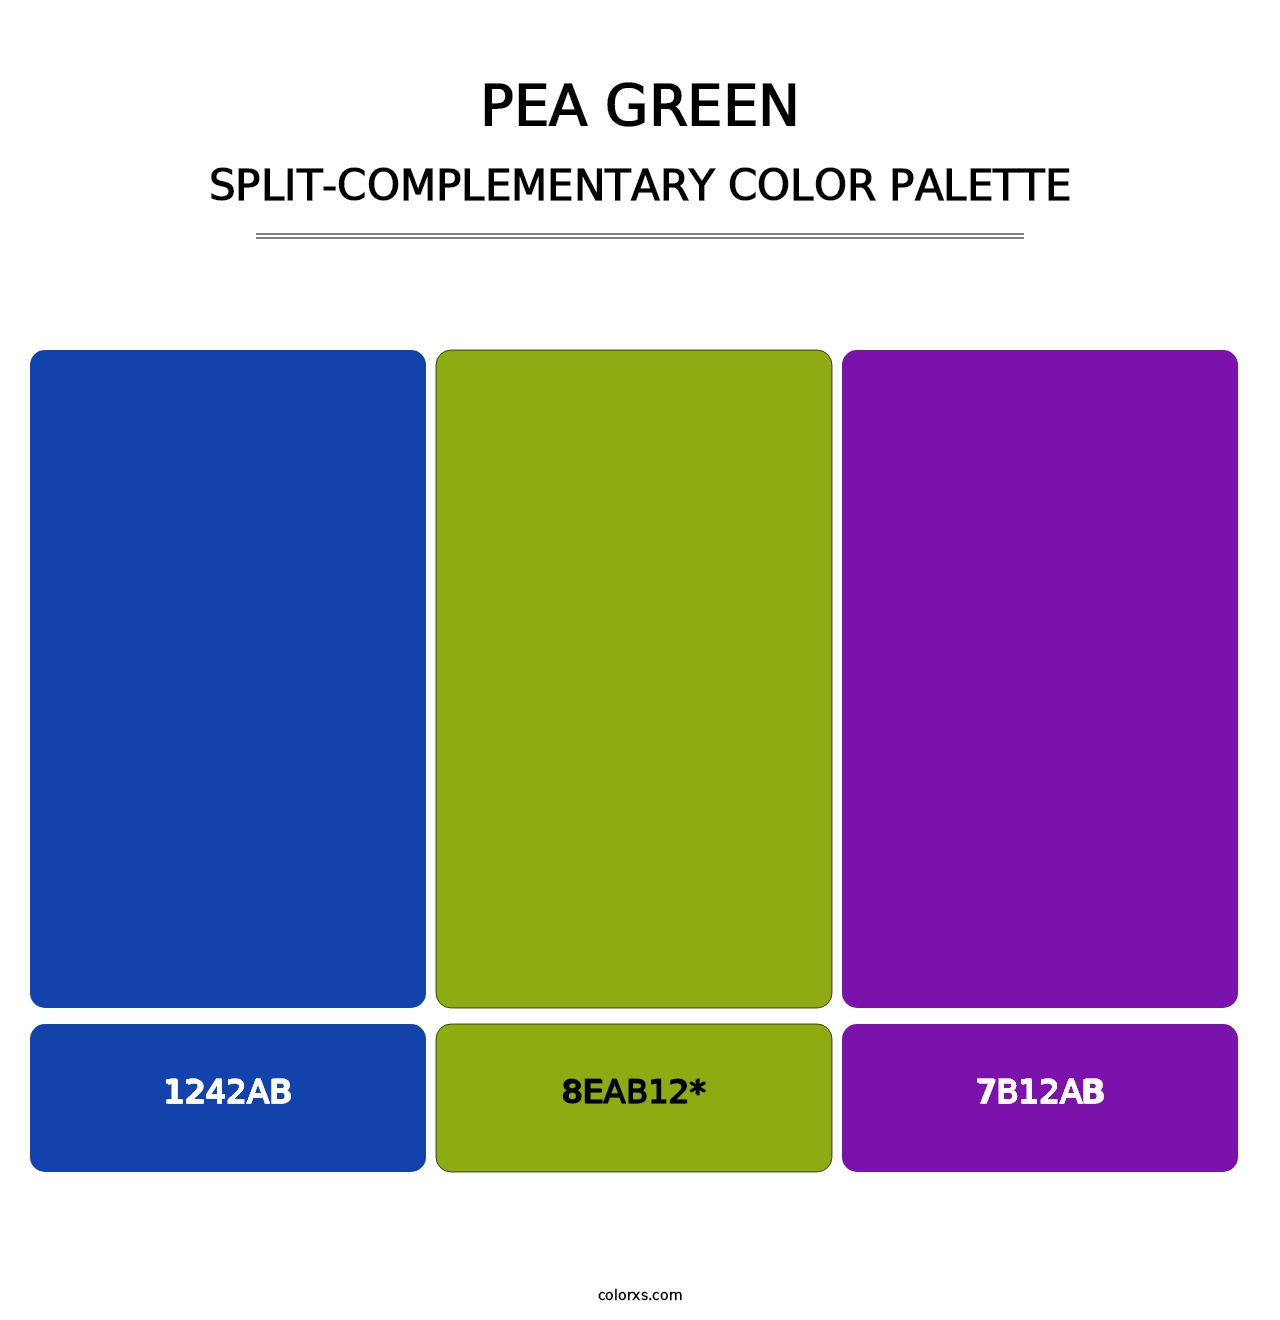 Pea Green - Split-Complementary Color Palette